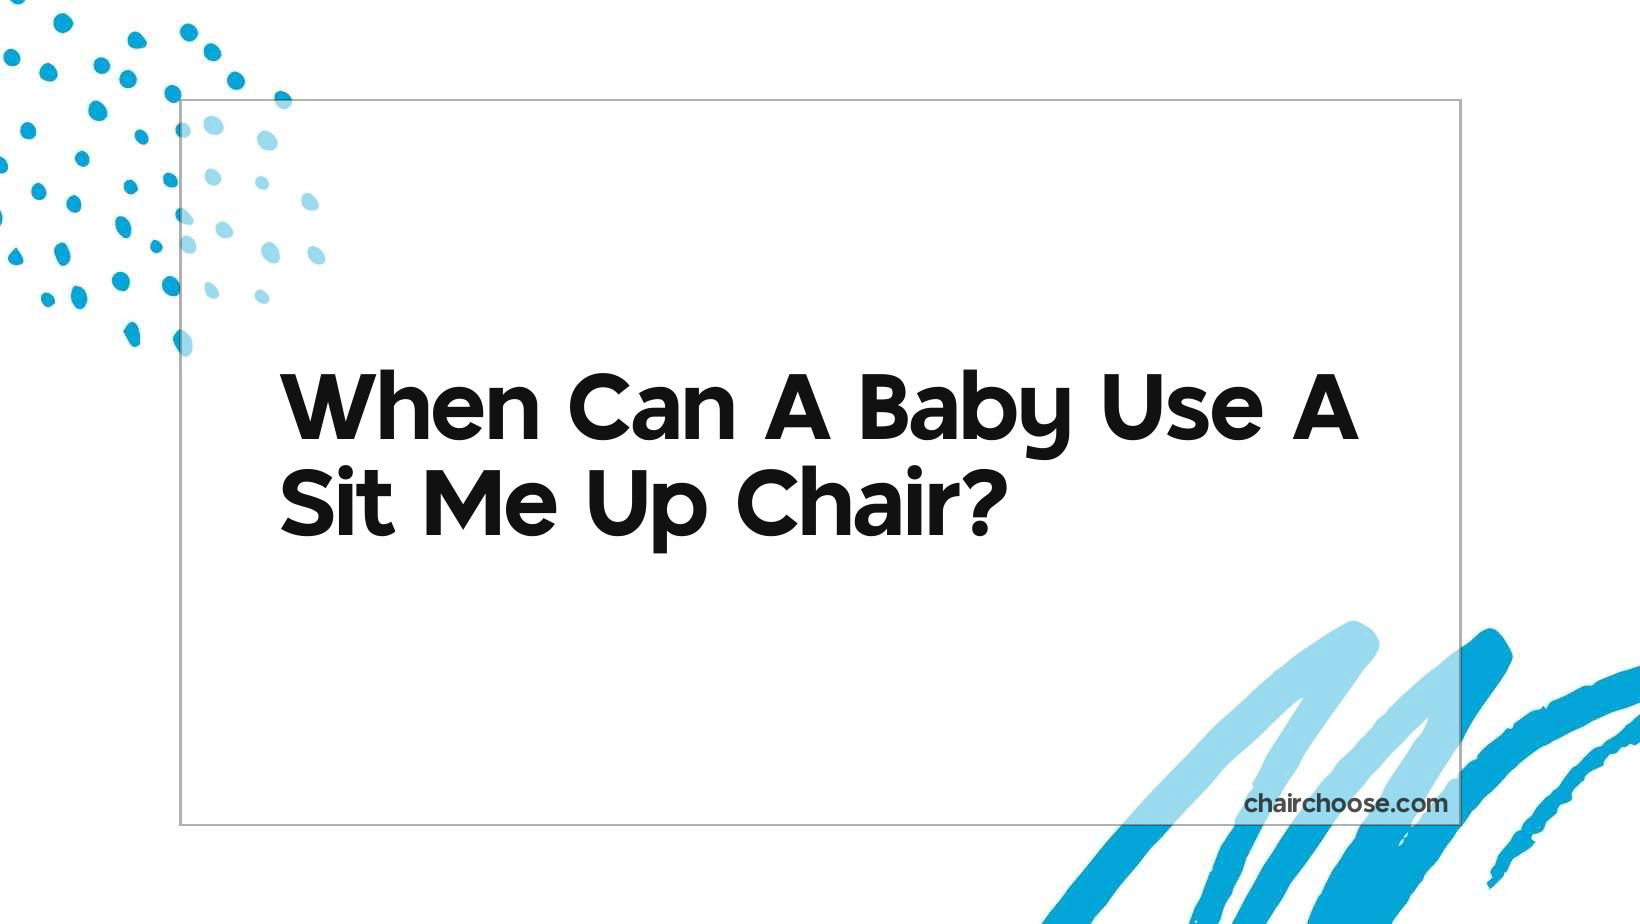 When Can A Baby Use A Sit Me Up Chair?